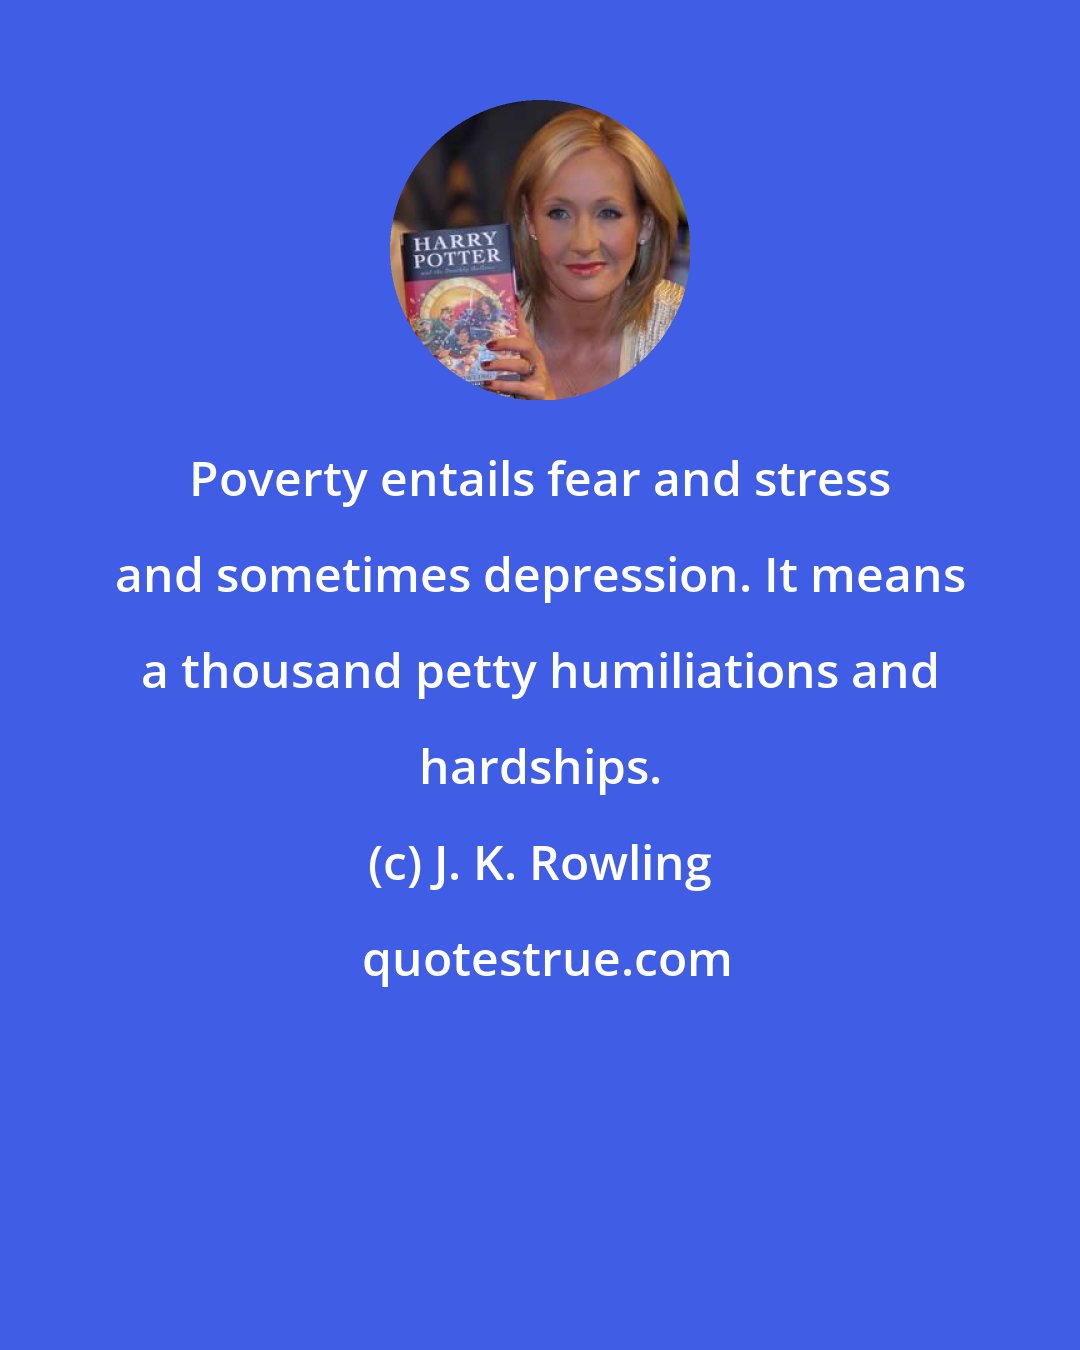 J. K. Rowling: Poverty entails fear and stress and sometimes depression. It means a thousand petty humiliations and hardships.